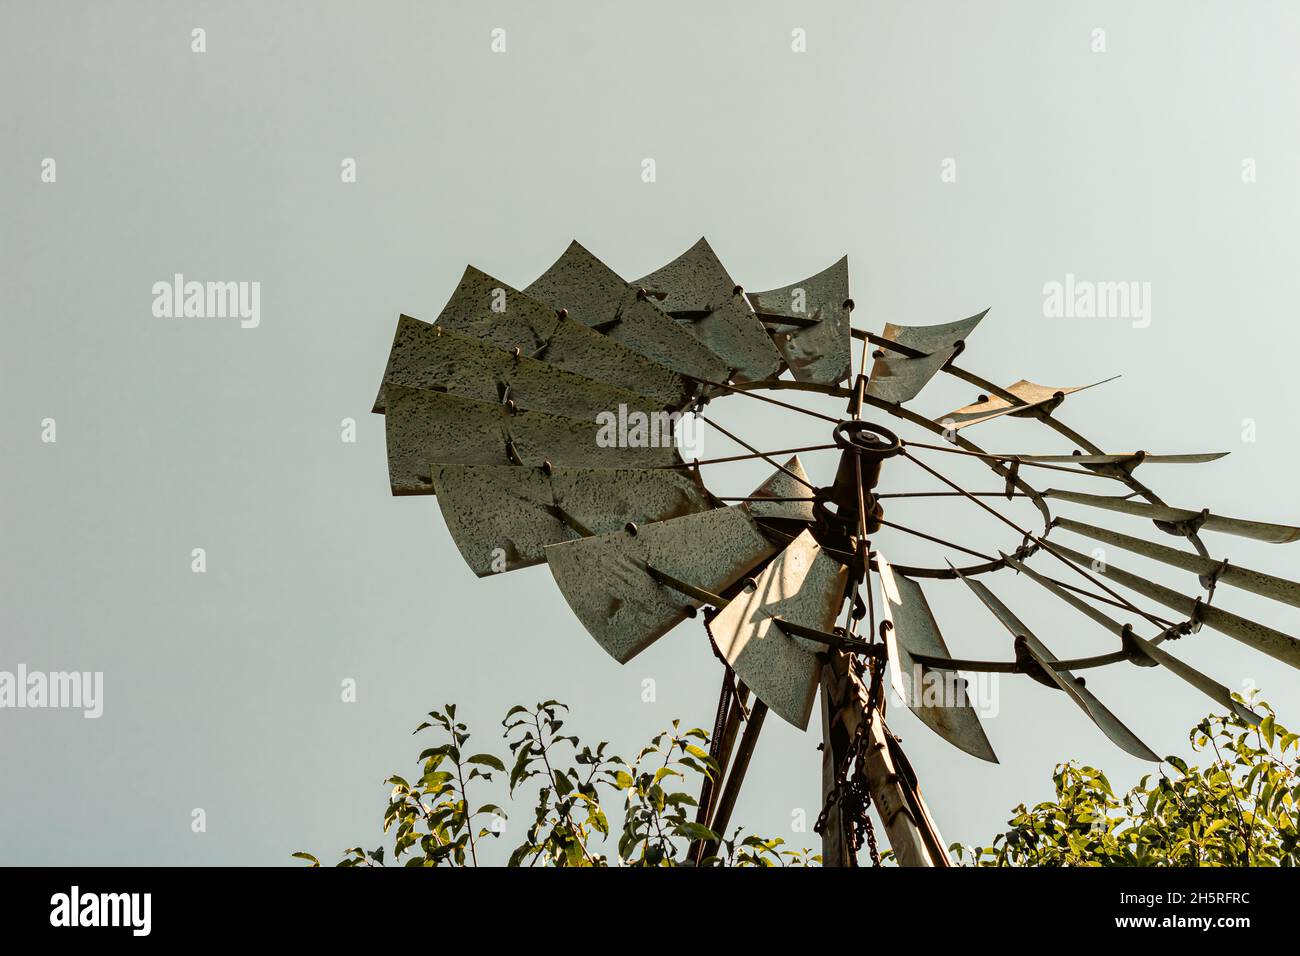 Vintage windmill against backdrop of grey sky and surrounded by green plants at base. Ontario, Canada. Stock Photo